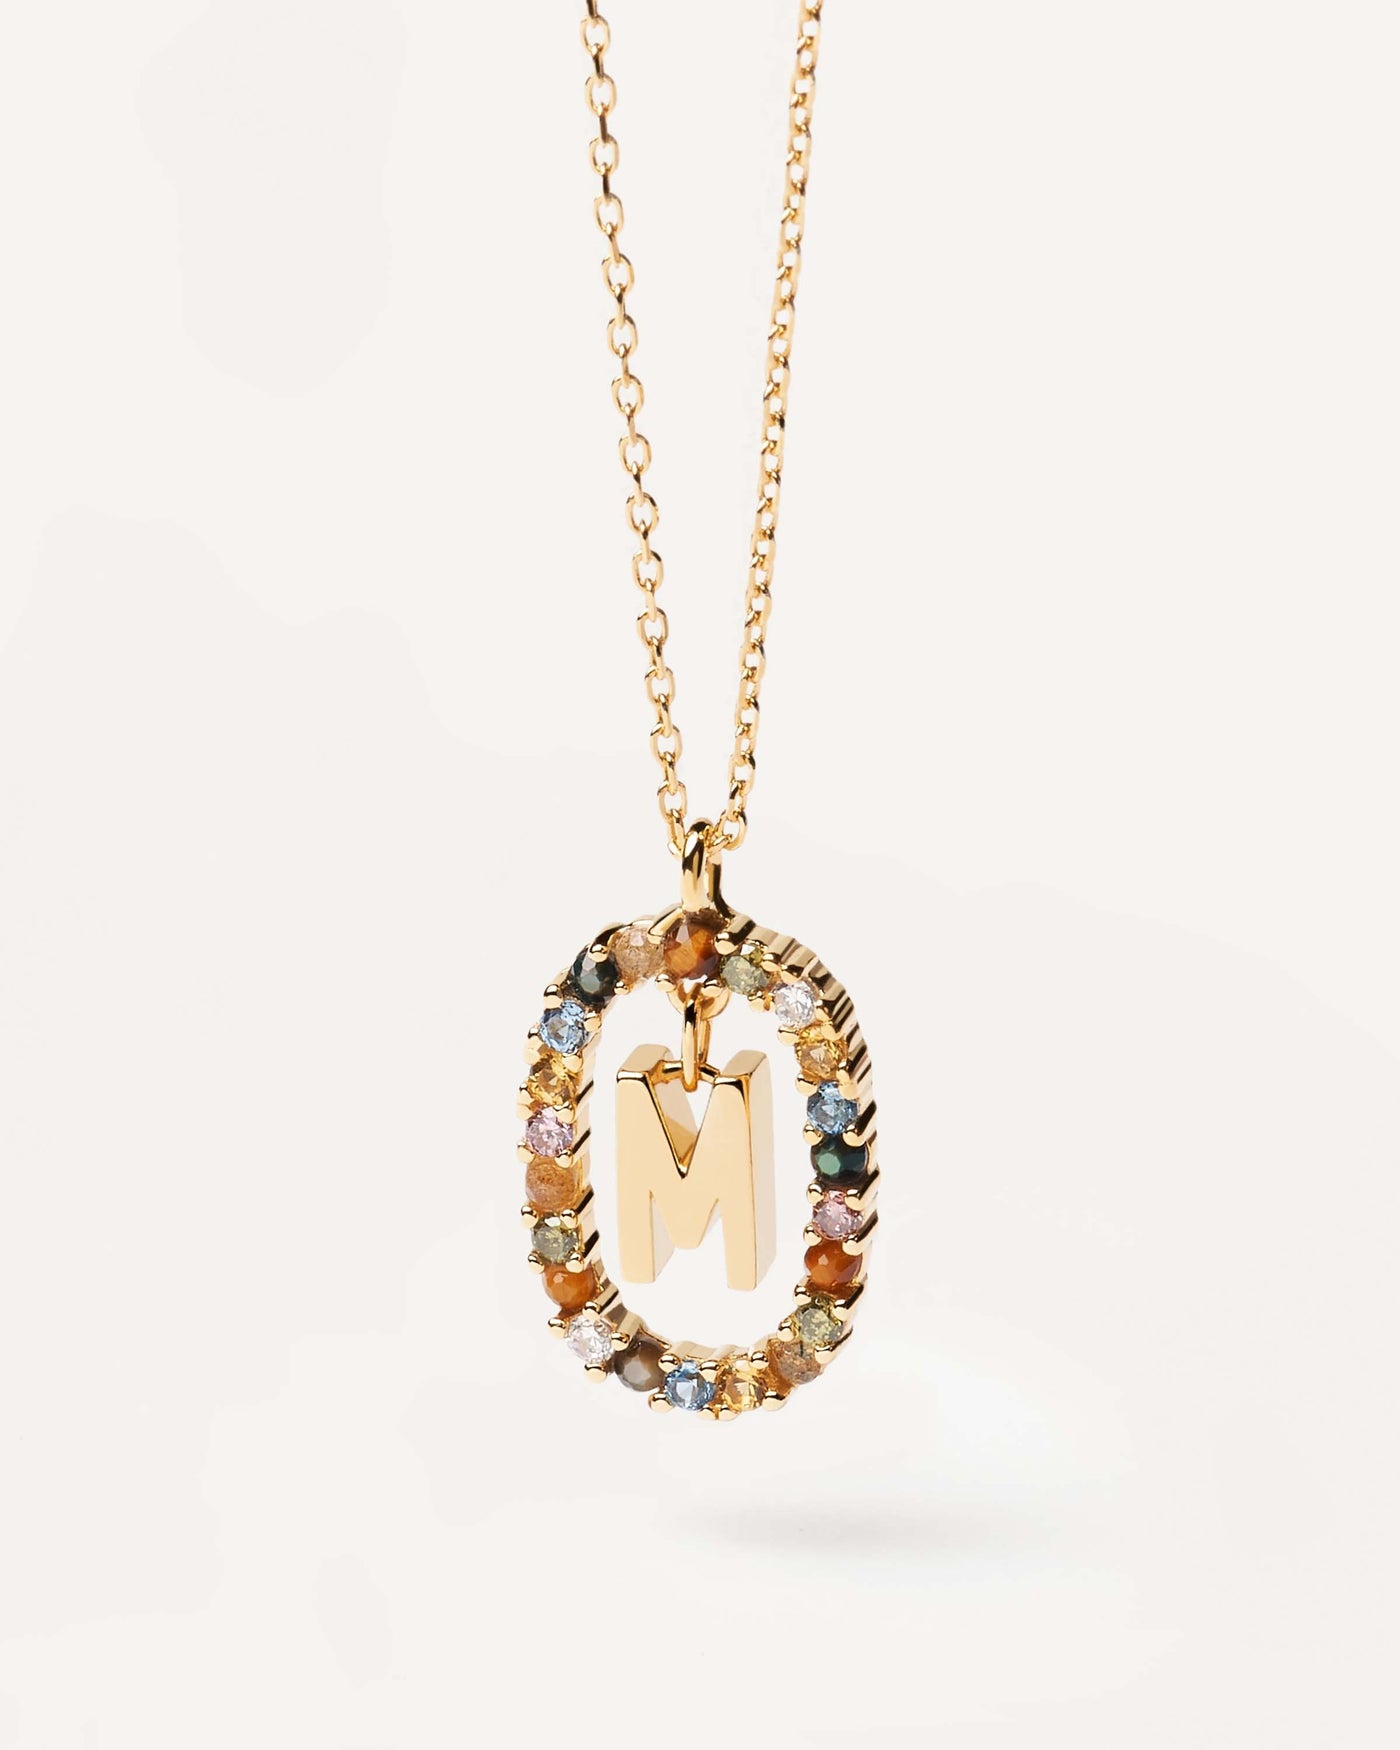 2023 Selection | Letter M necklace. Initial M necklace in gold-plated silver, circled by colorful gemstones. Get the latest arrival from PDPAOLA. Place your order safely and get this Best Seller. Free Shipping.